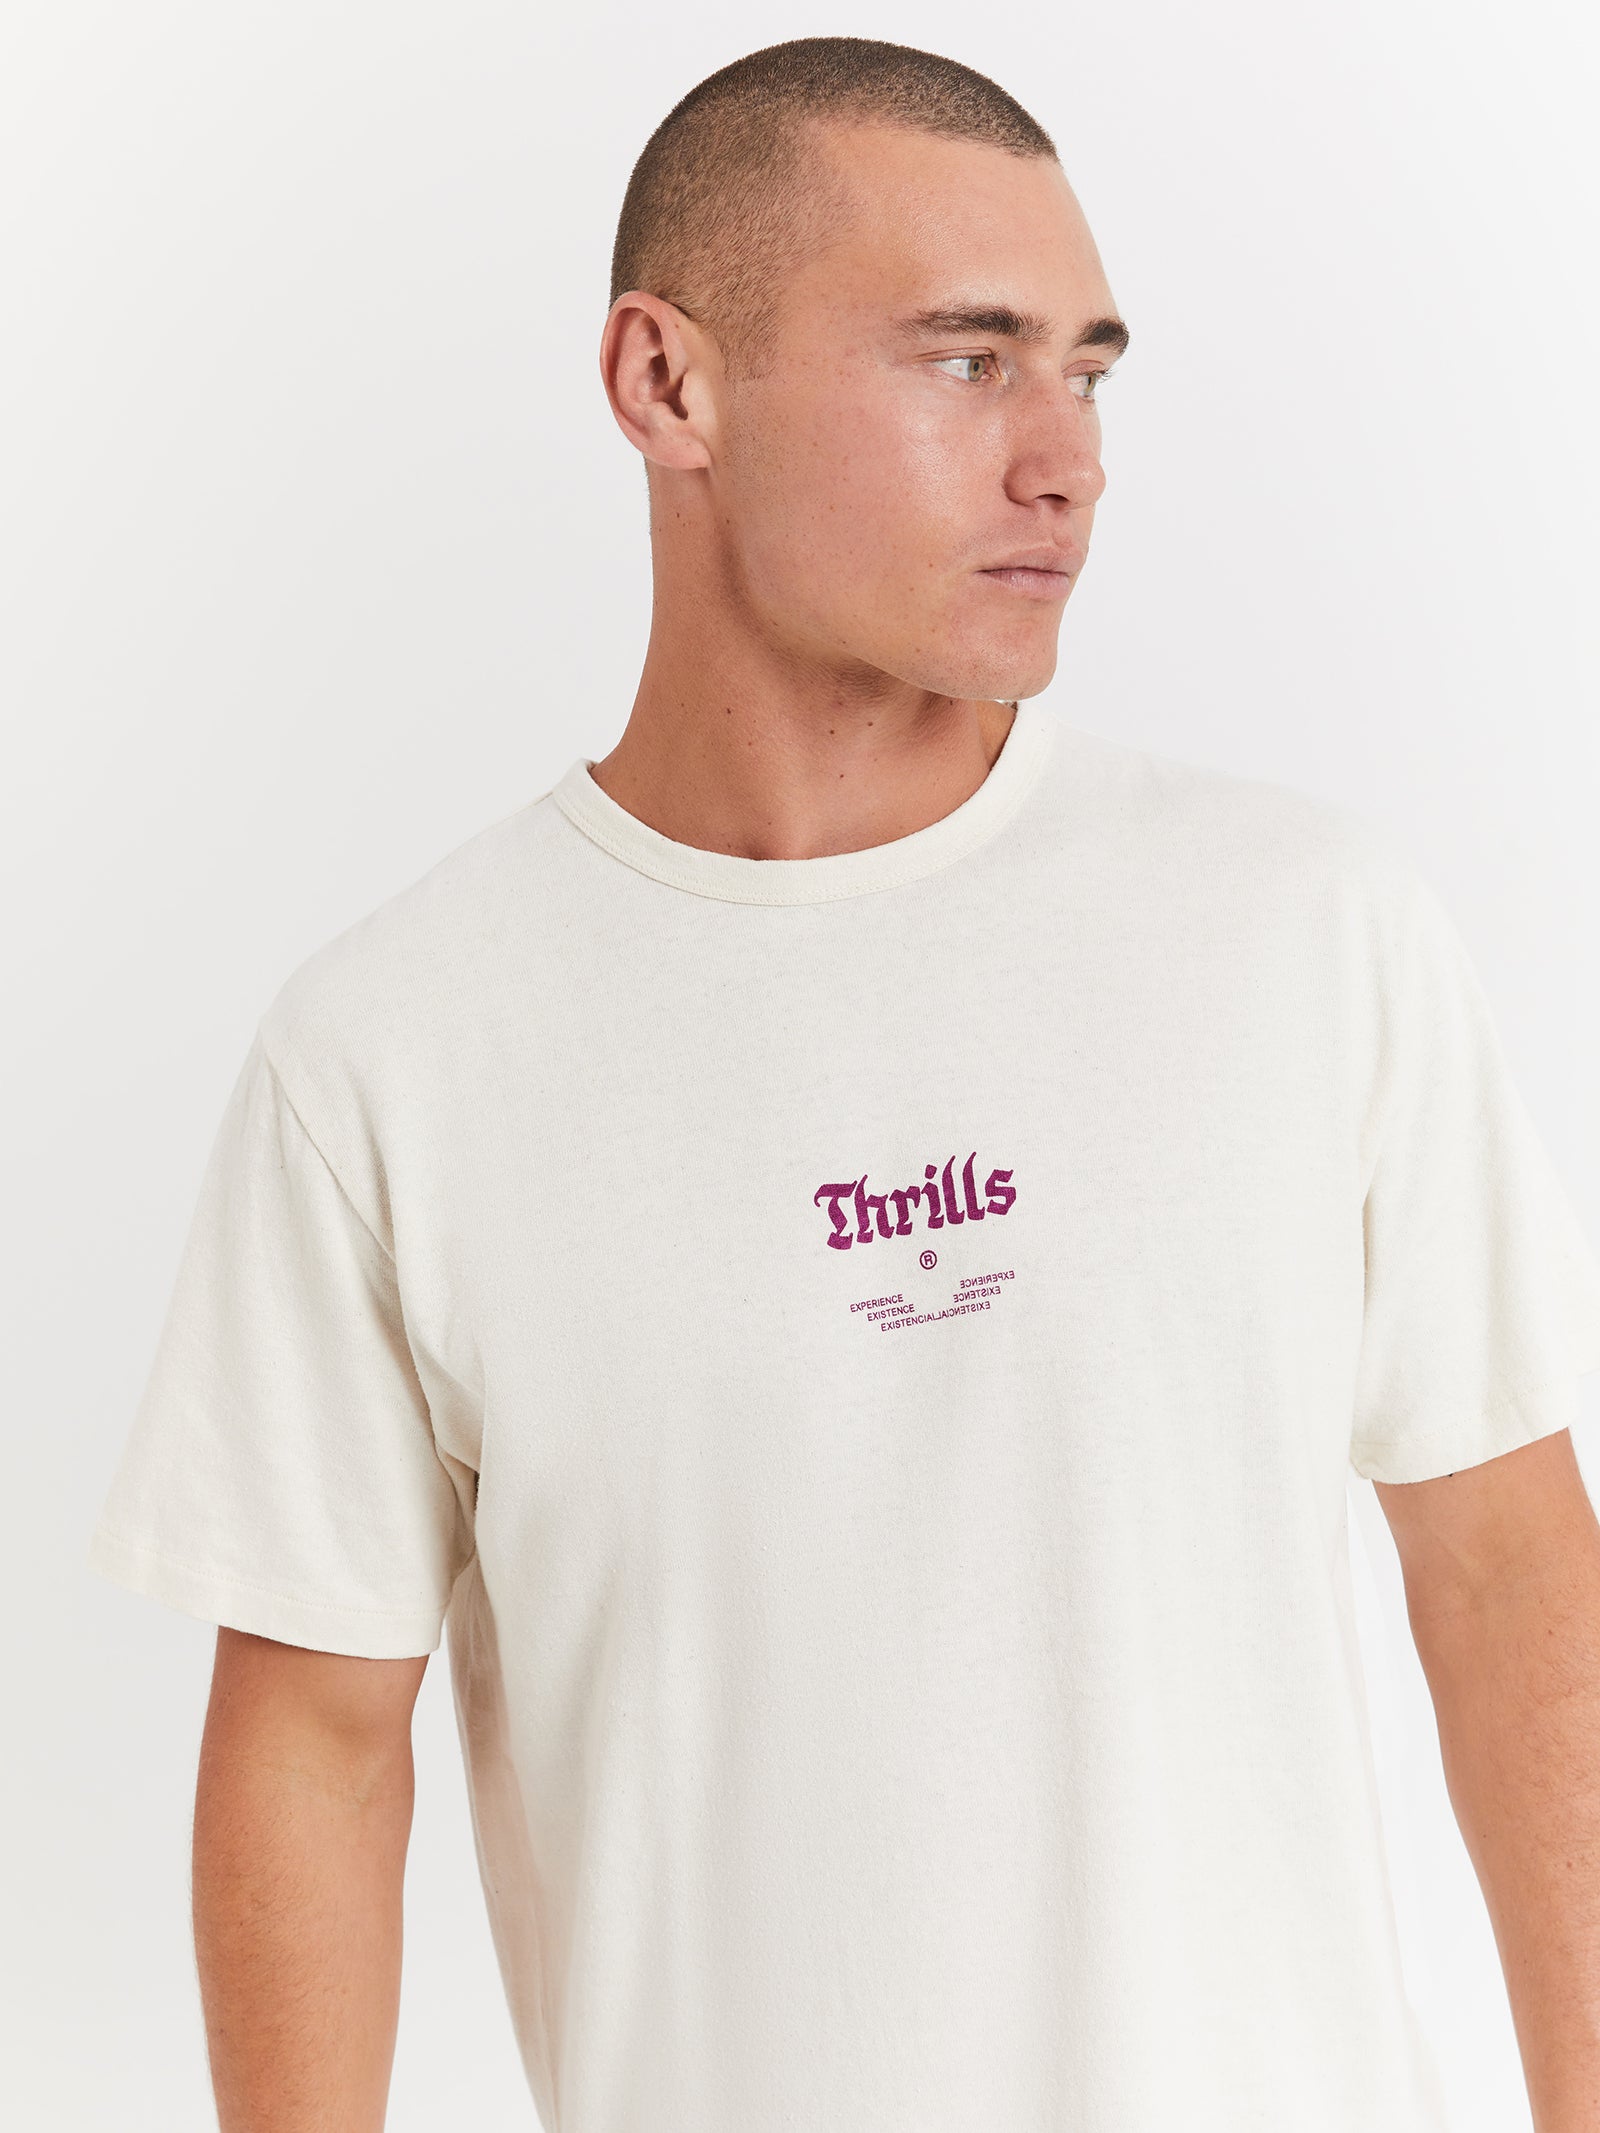 Wishes Come True Merch Fit T-Shirt in Unbleached